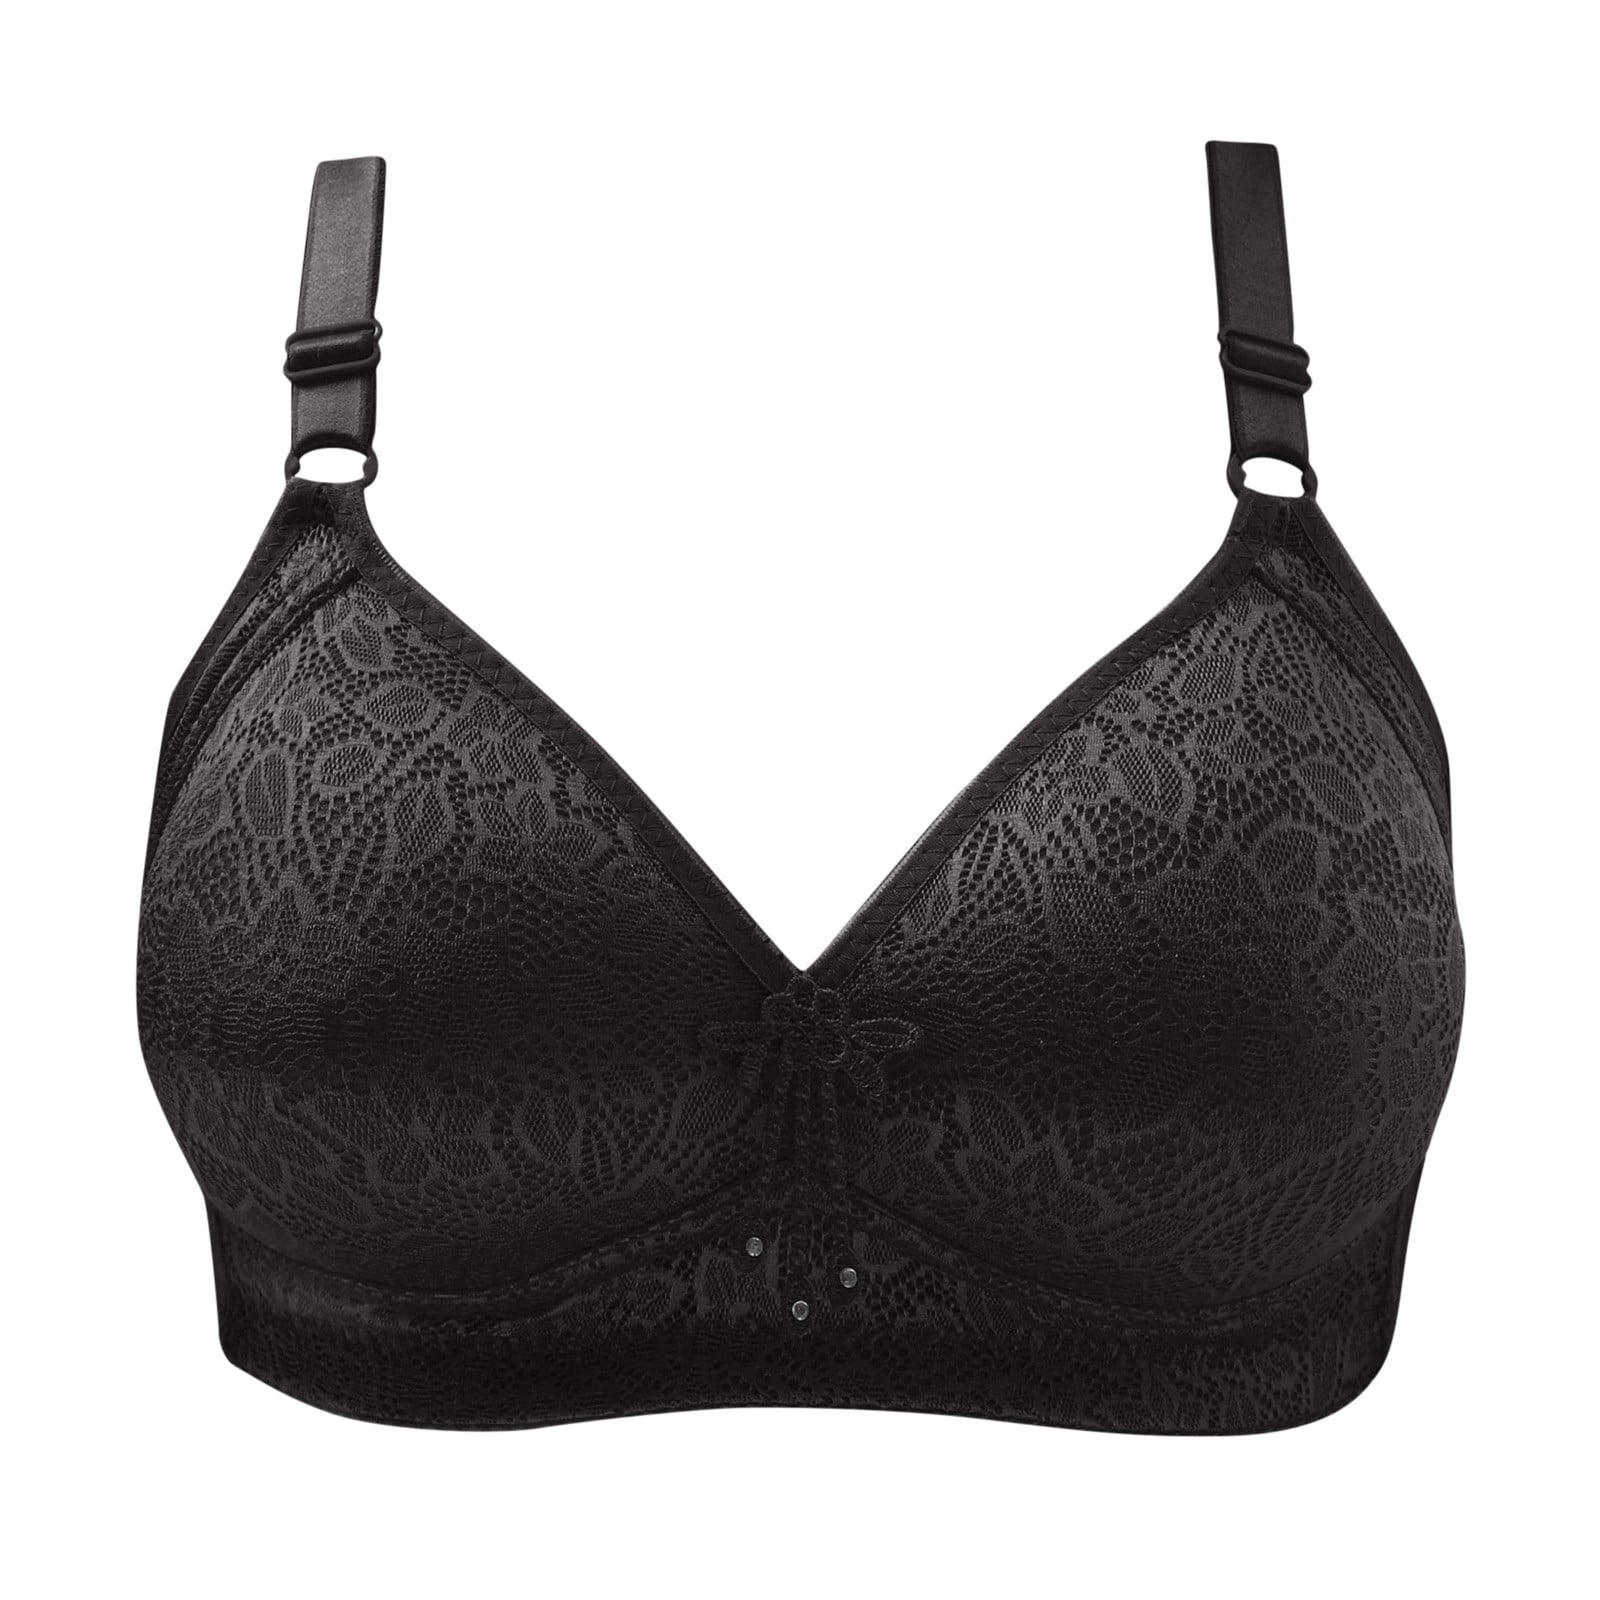 Time to Stock Up: Shop the Best Bras and Support the Fight Against